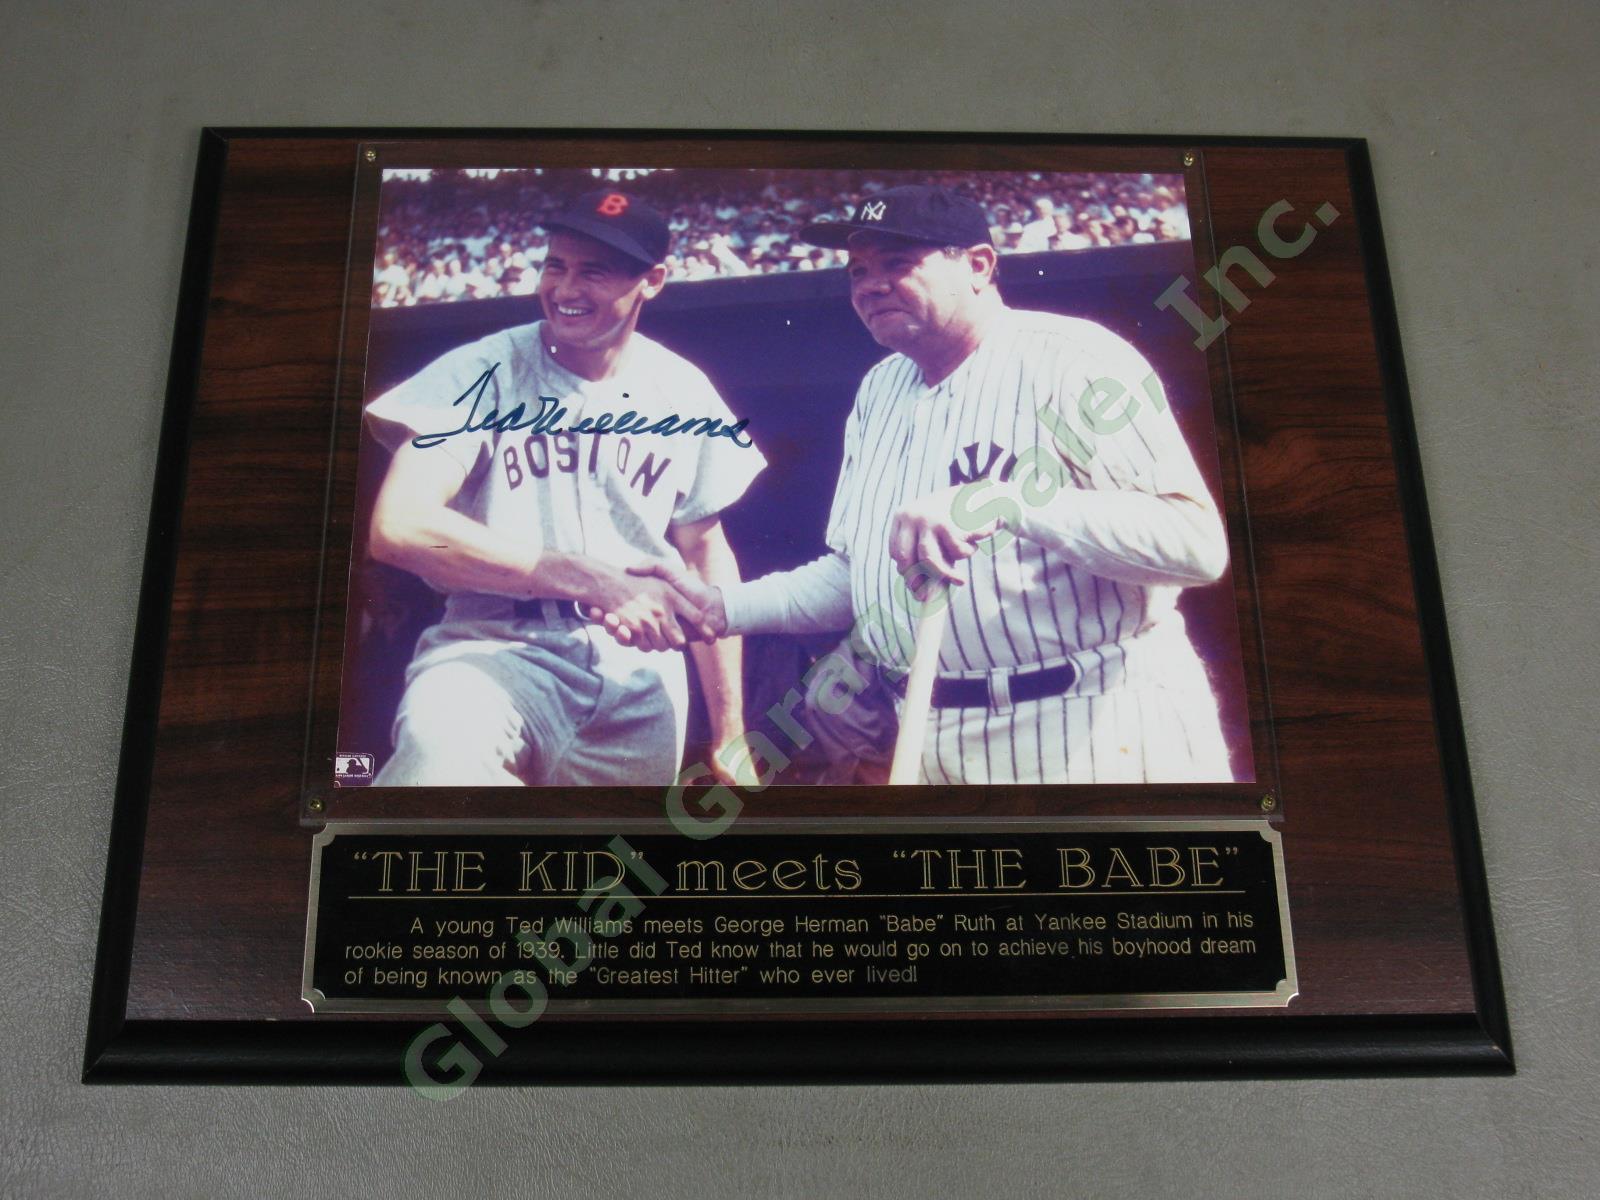 Ted Williams Signed 8x10 Photo Plaque w/ Babe Ruth The Kid Meets The Babe 1939